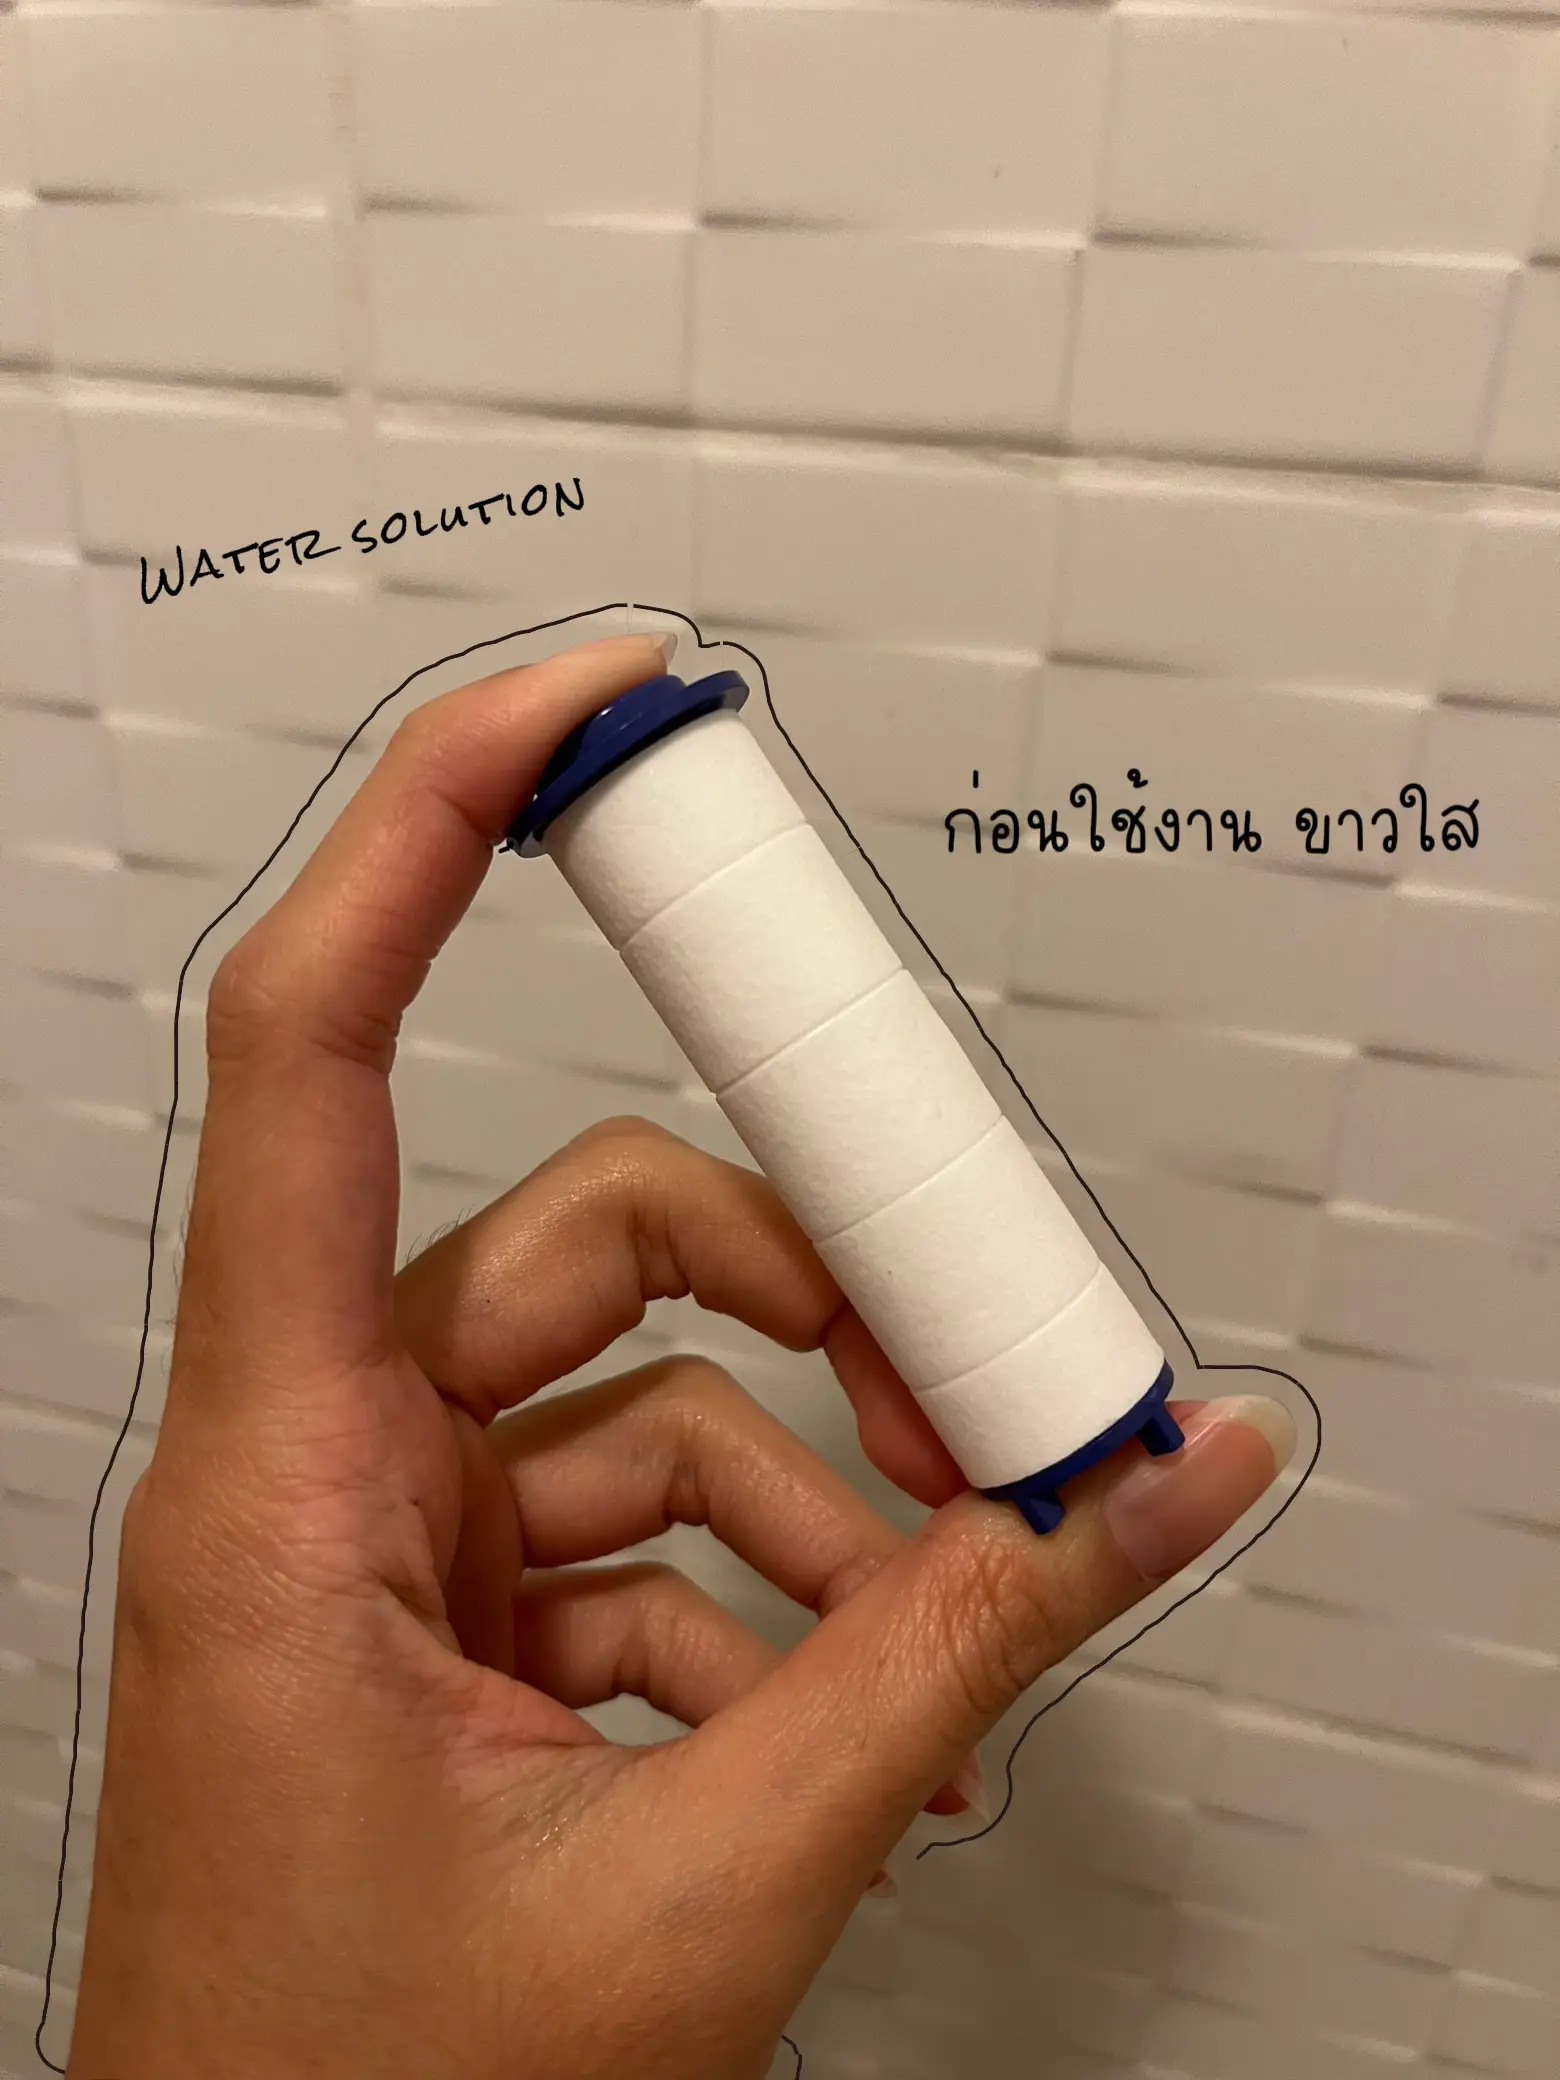 Philips Shower Filter AWP1775 (Shower Filter Water Filter), Gallery posted  by 🅺 a̺͆ ё K̺͆ 🅐 ё